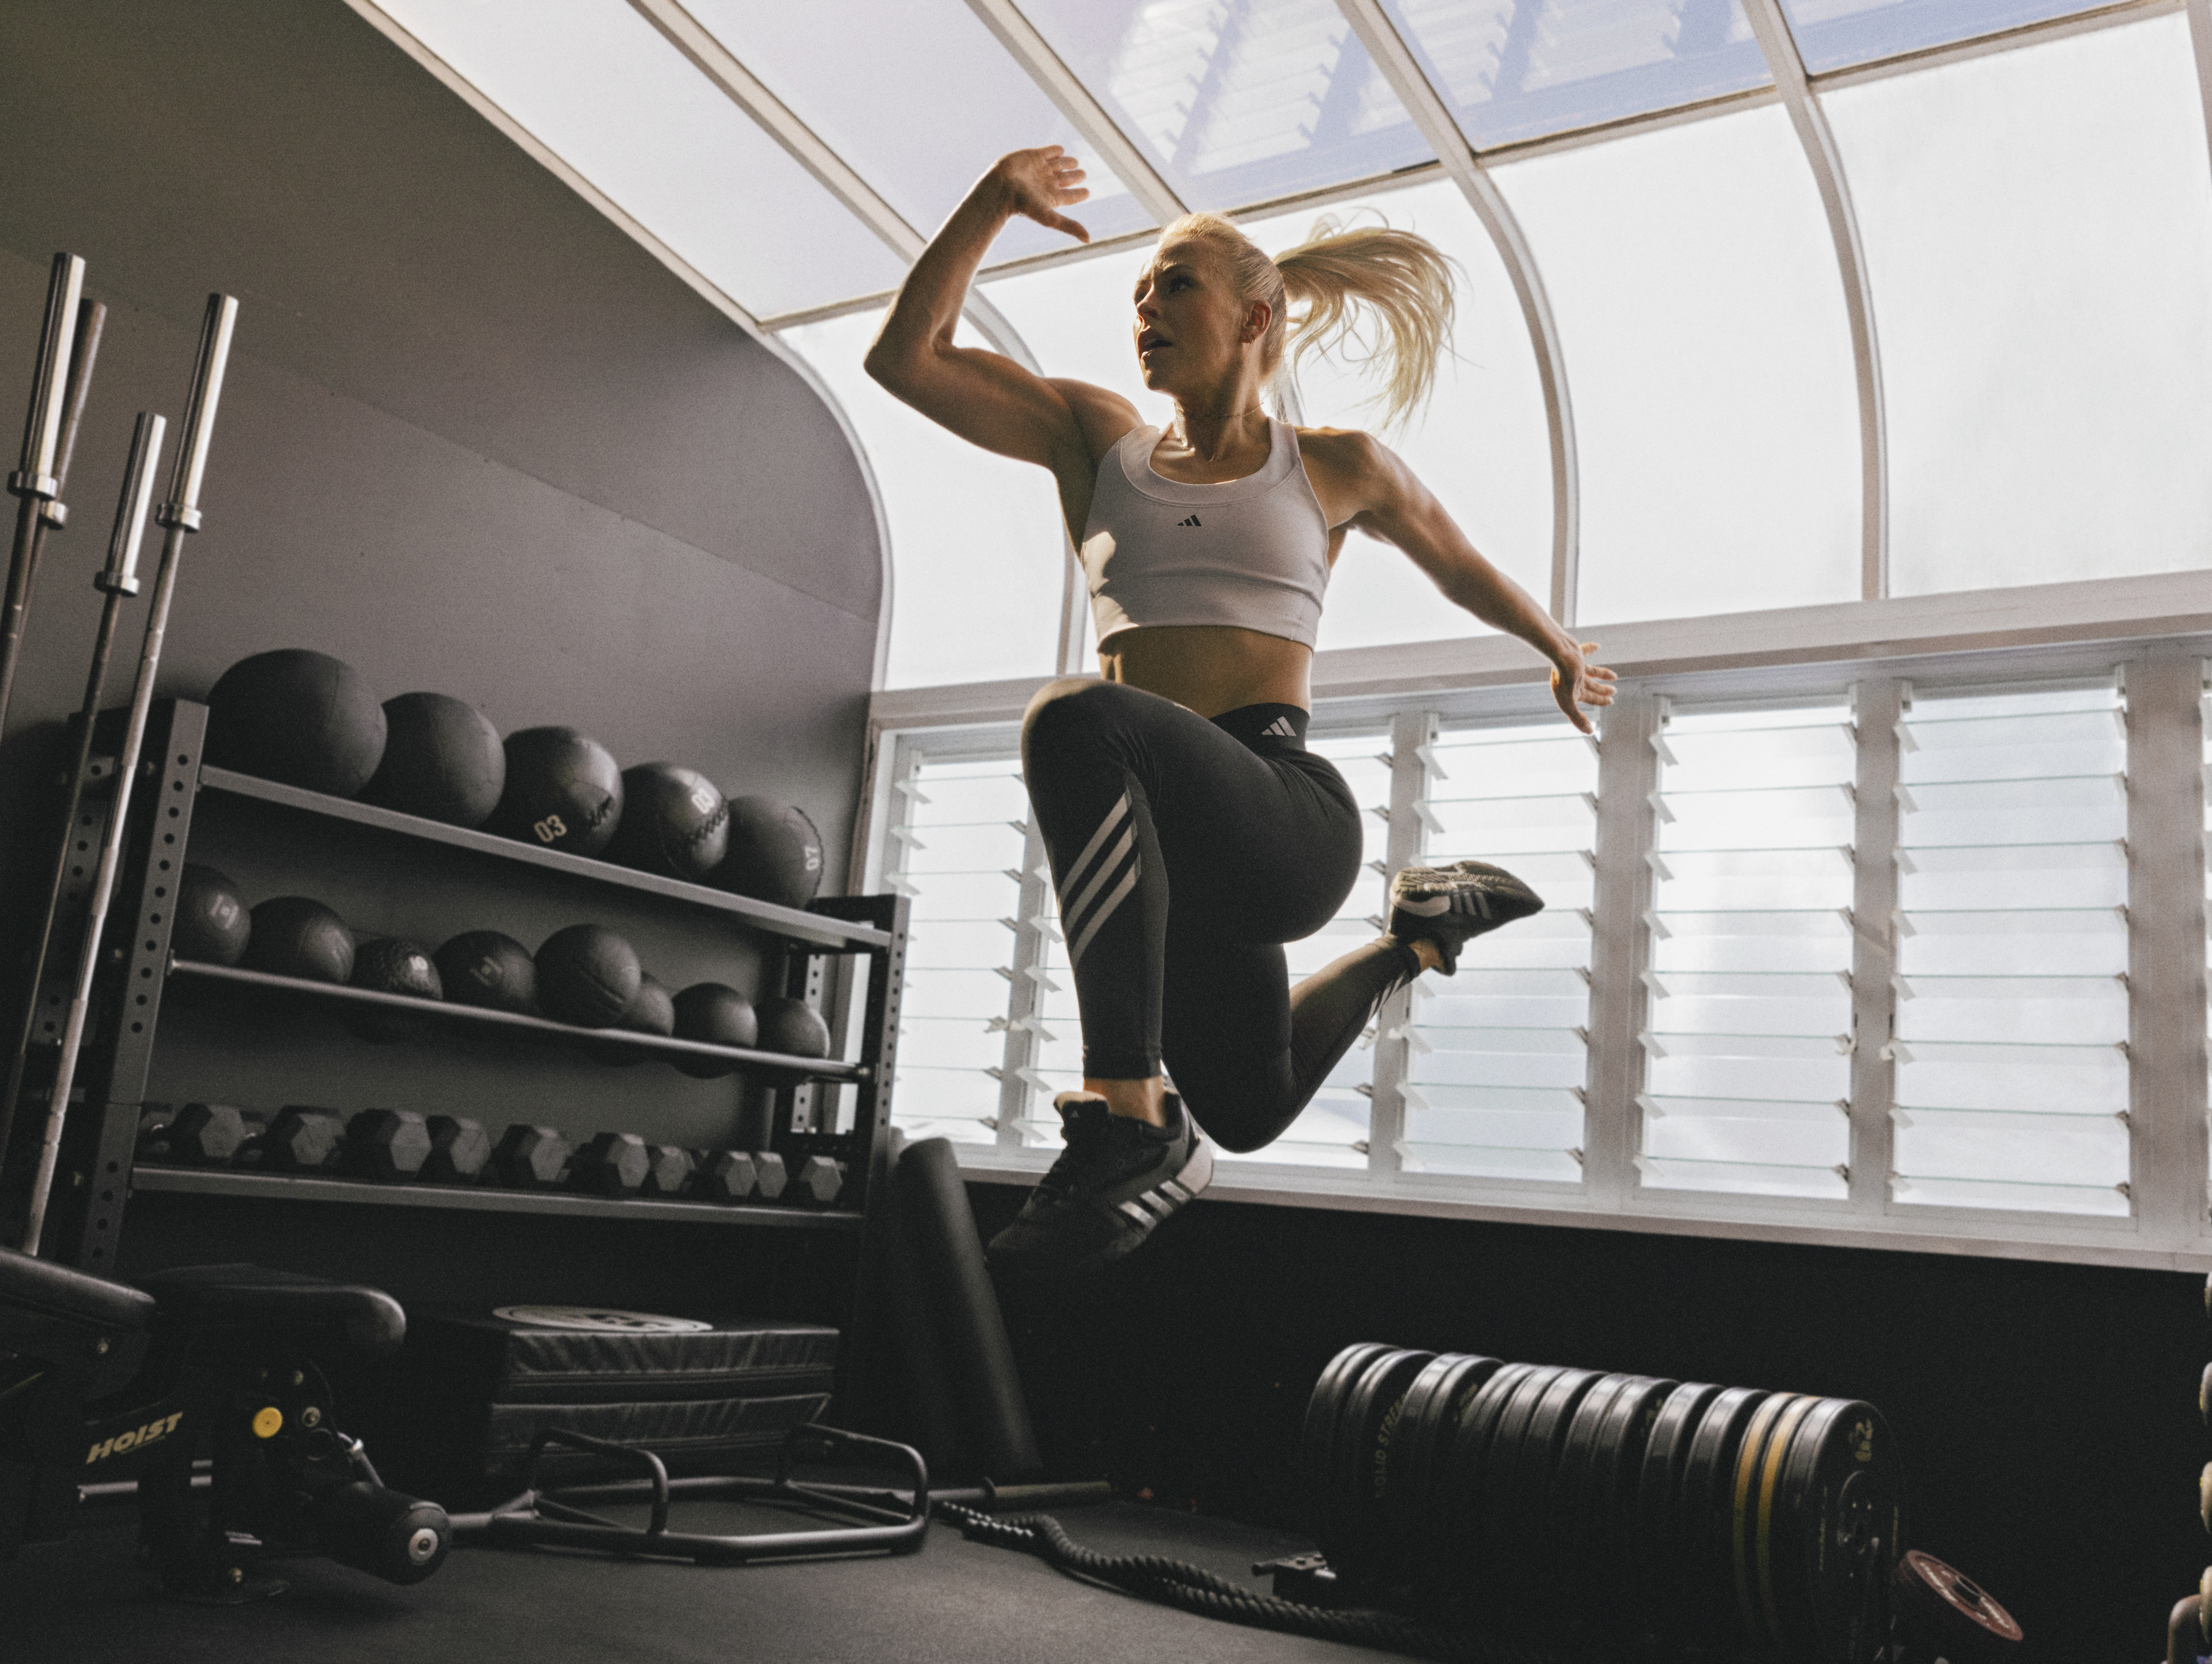 Discover the Benefits of LES MILLS Classes